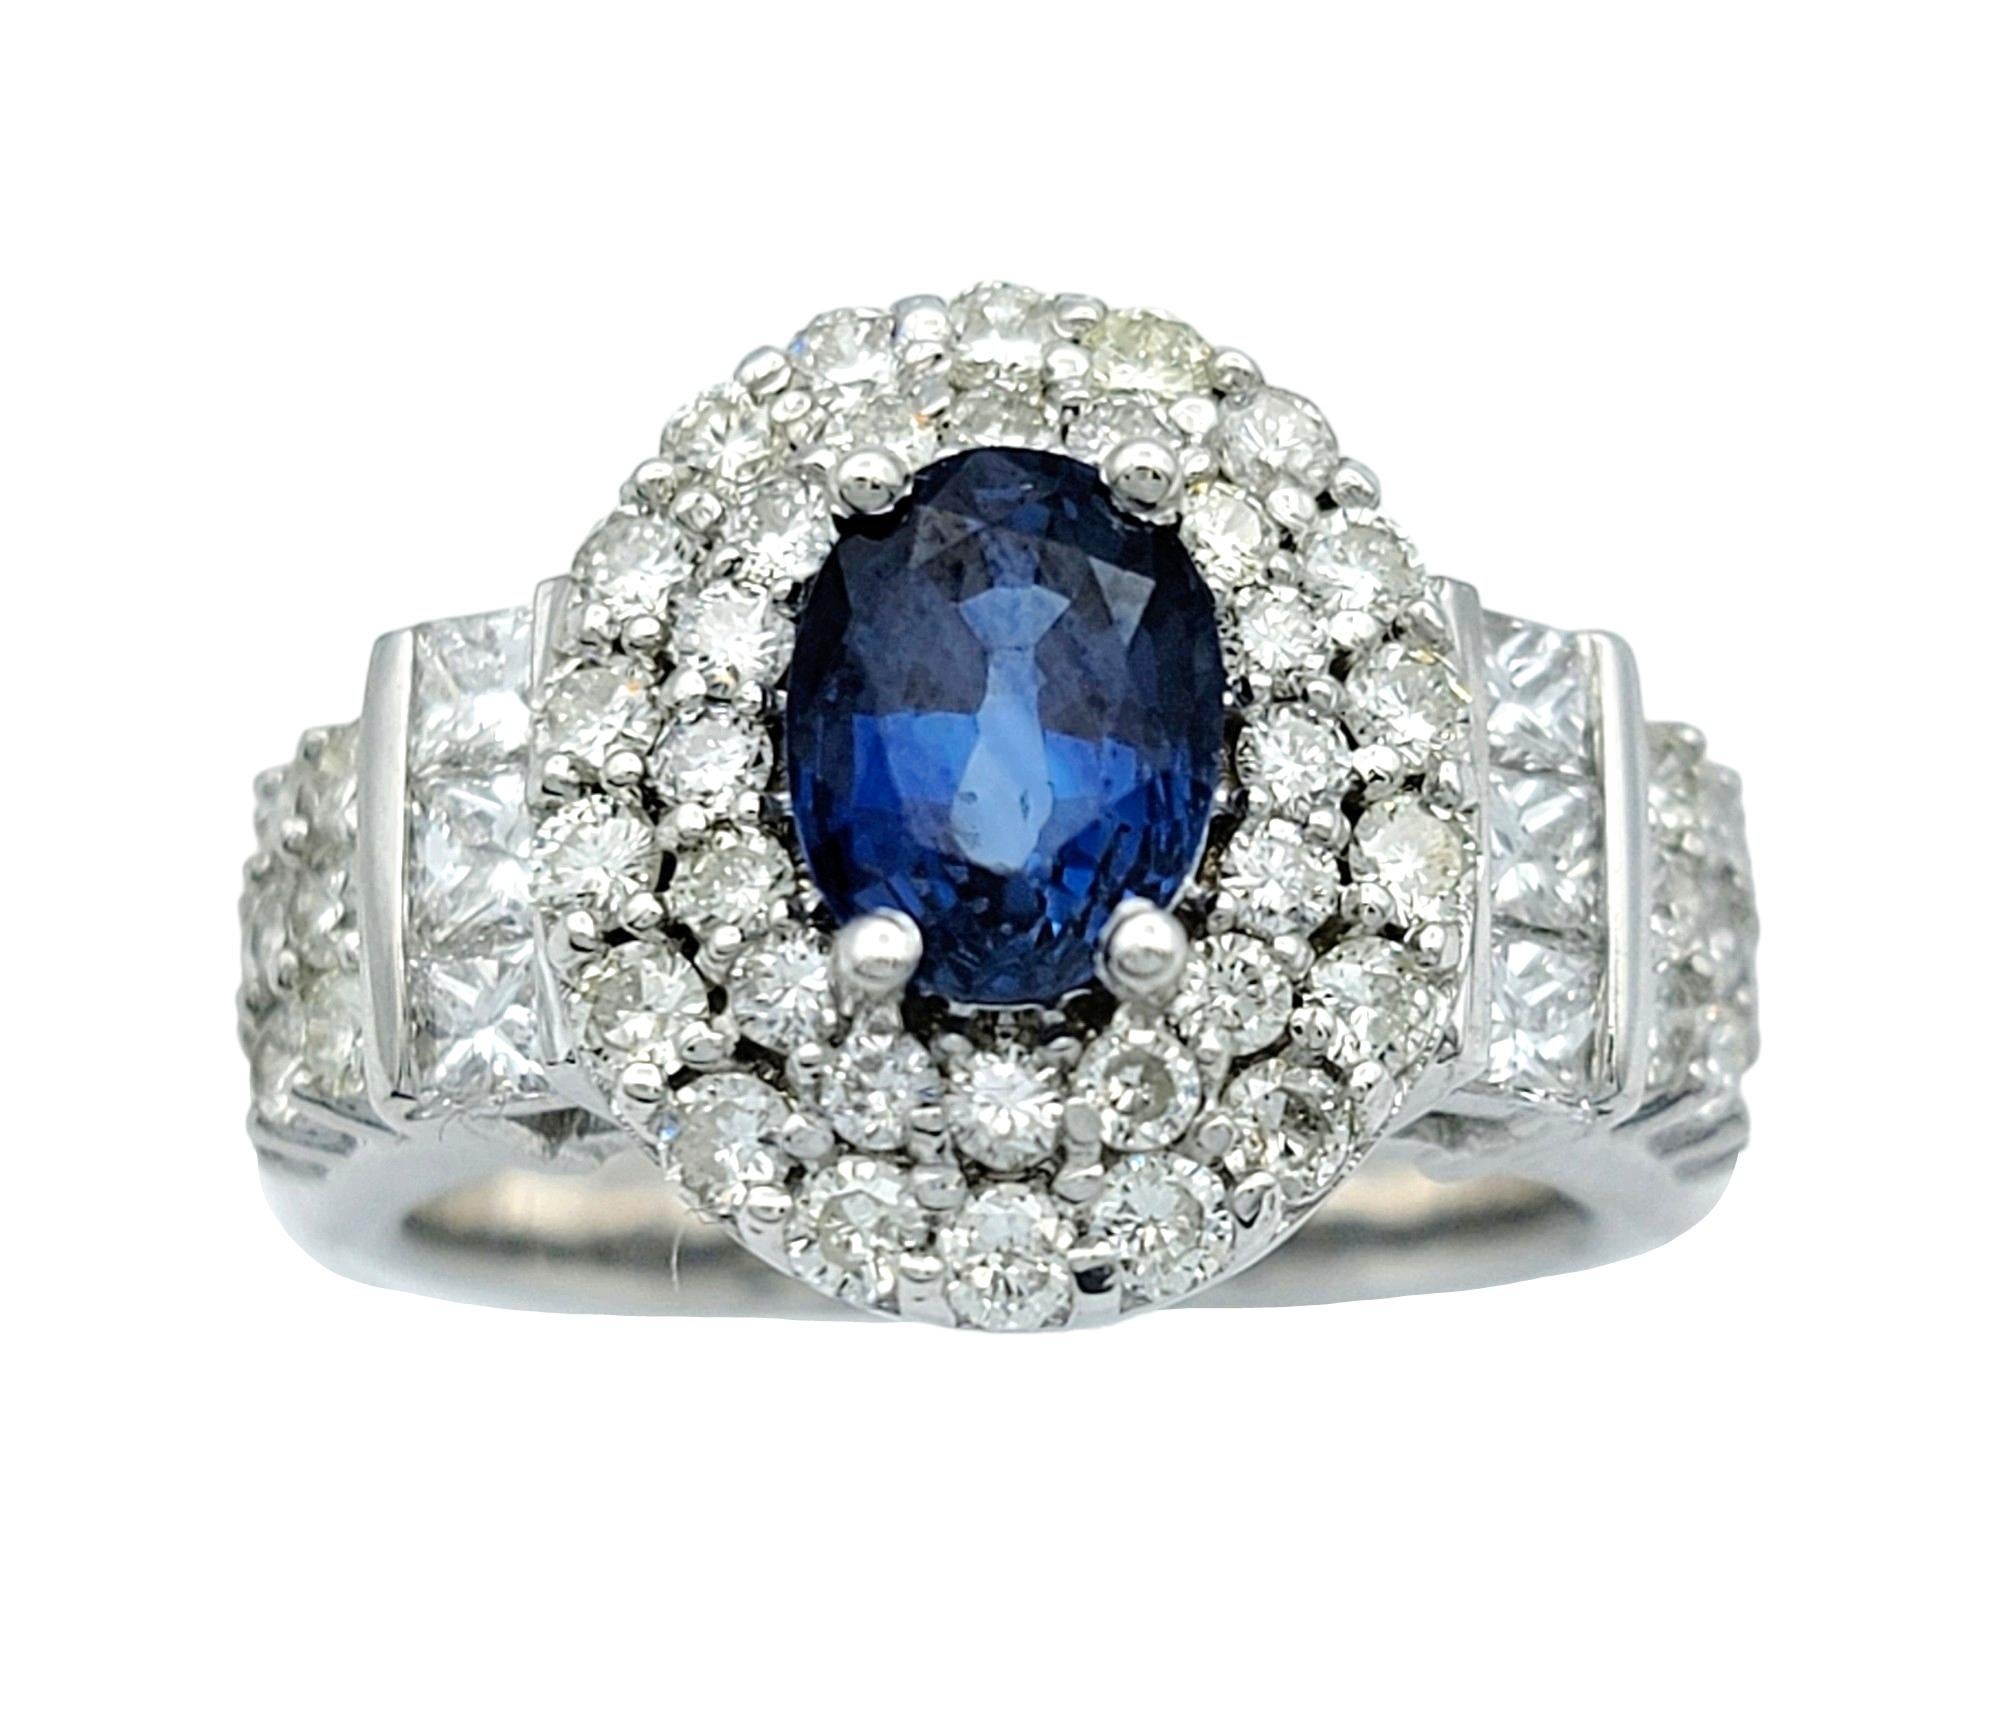 Ring Size: 6

This gorgeous oval blue sapphire and double diamond halo cocktail ring, exquisitely set in lustrous 14 karat white gold, is a dazzling display of elegance and sophistication. At its center, a captivating oval blue sapphire commands